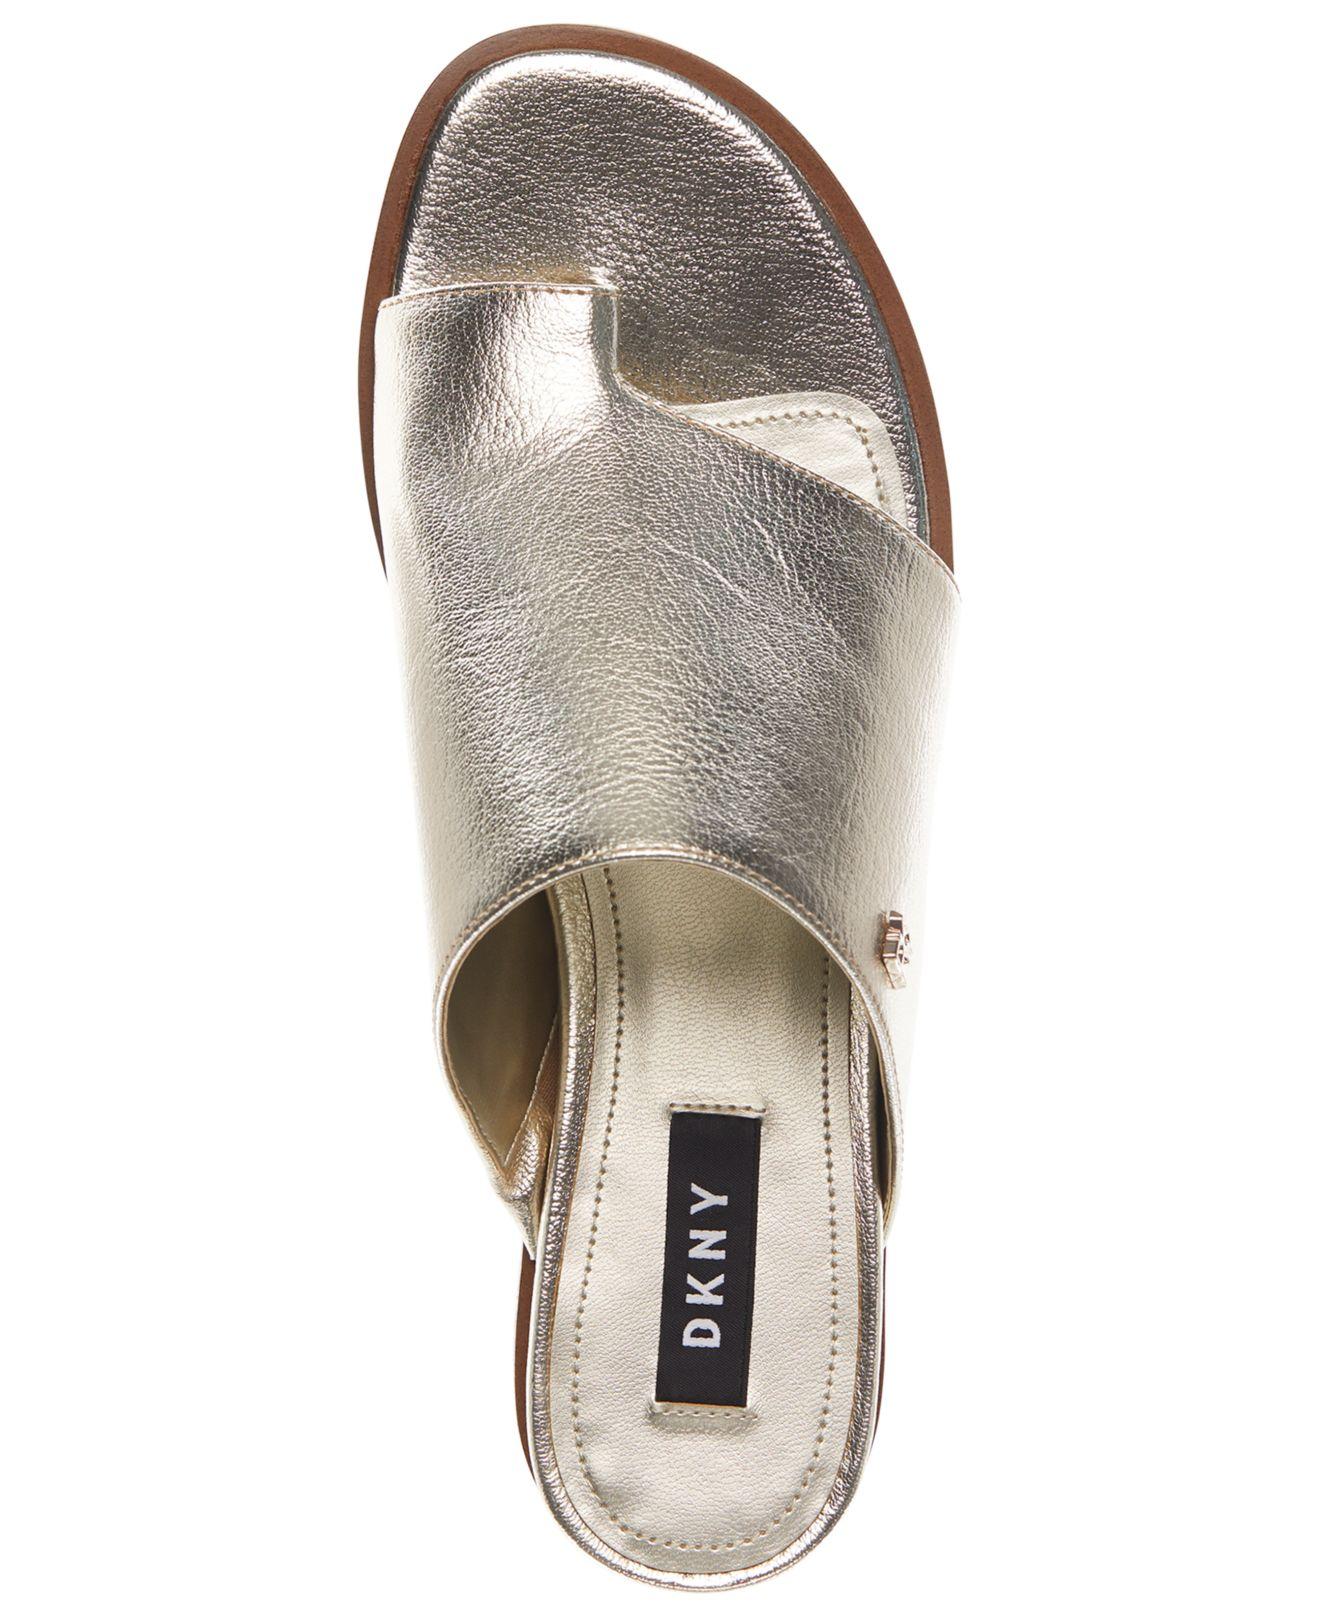 DKNY Leather Daz Flat Sandals, Created For Macy's - Lyst